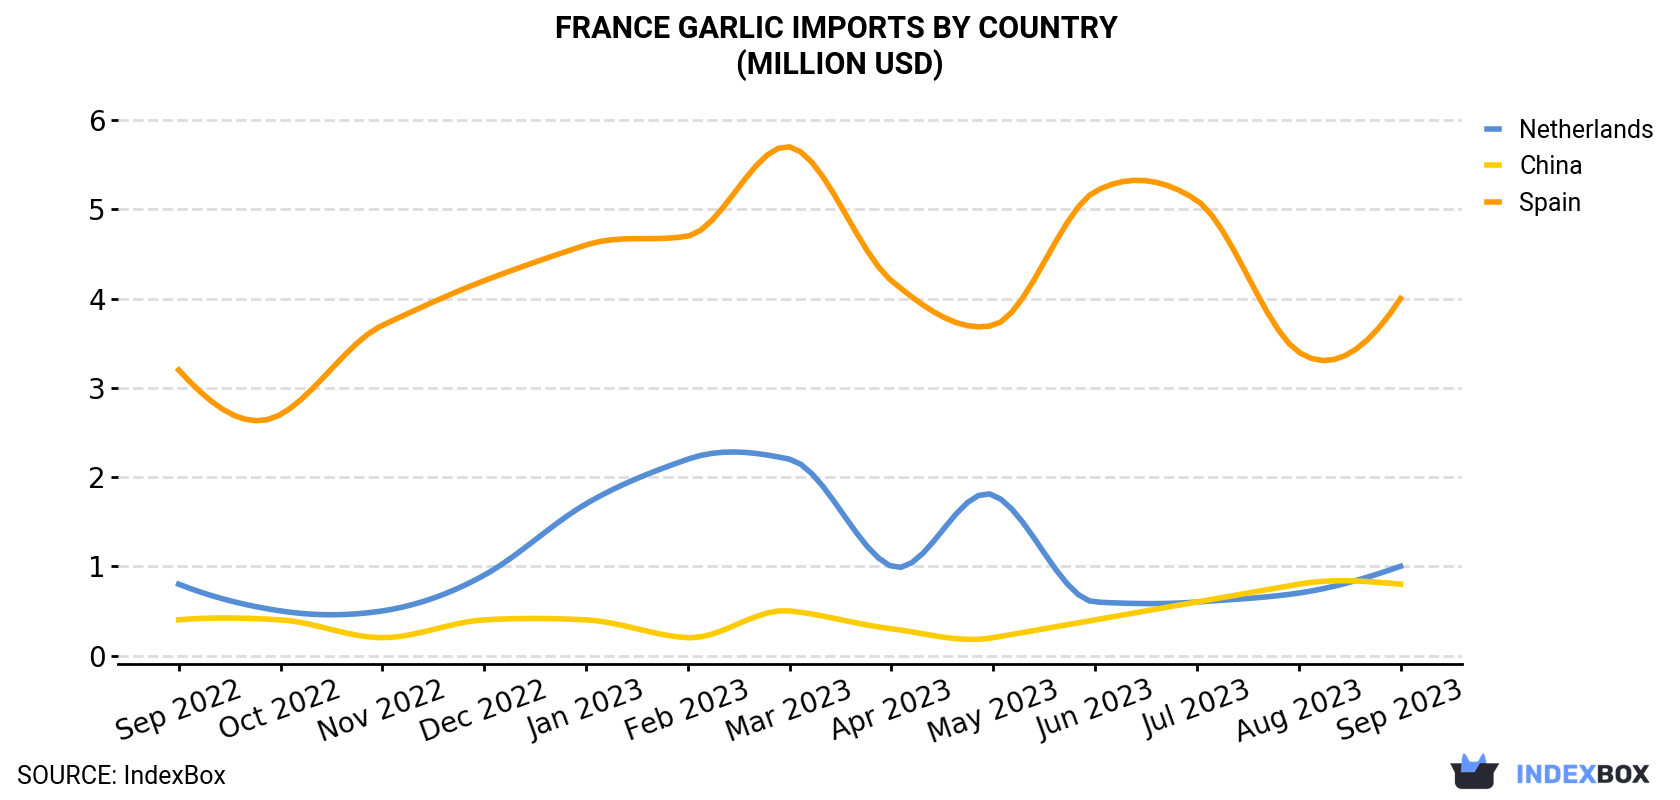 France Garlic Imports By Country (Million USD)